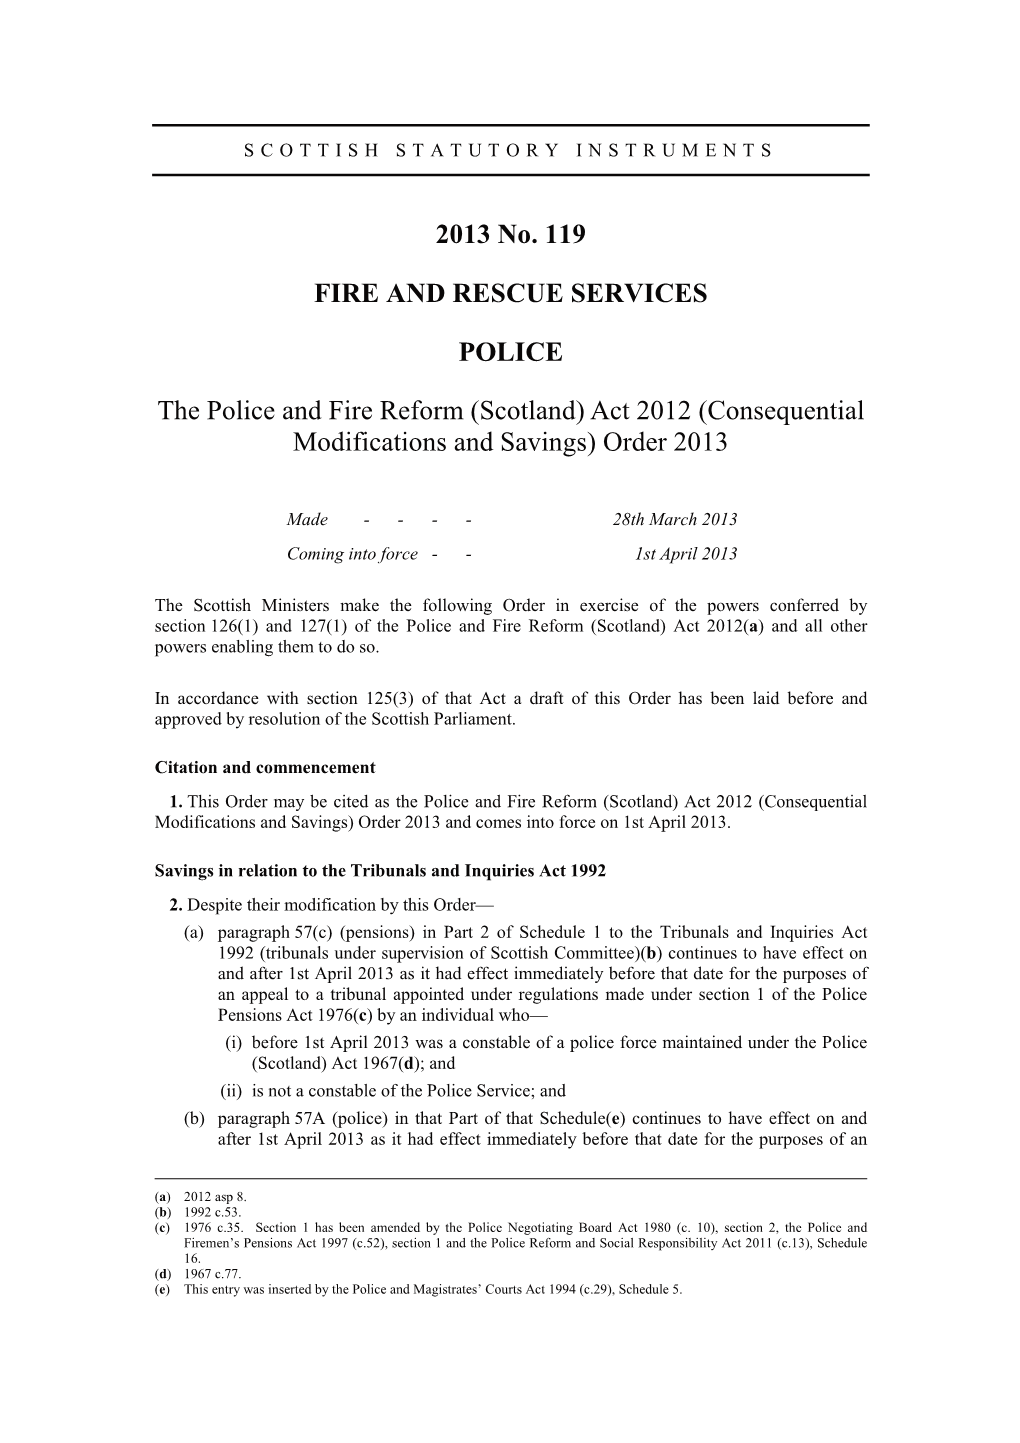 2013 No. 119 FIRE and RESCUE SERVICES